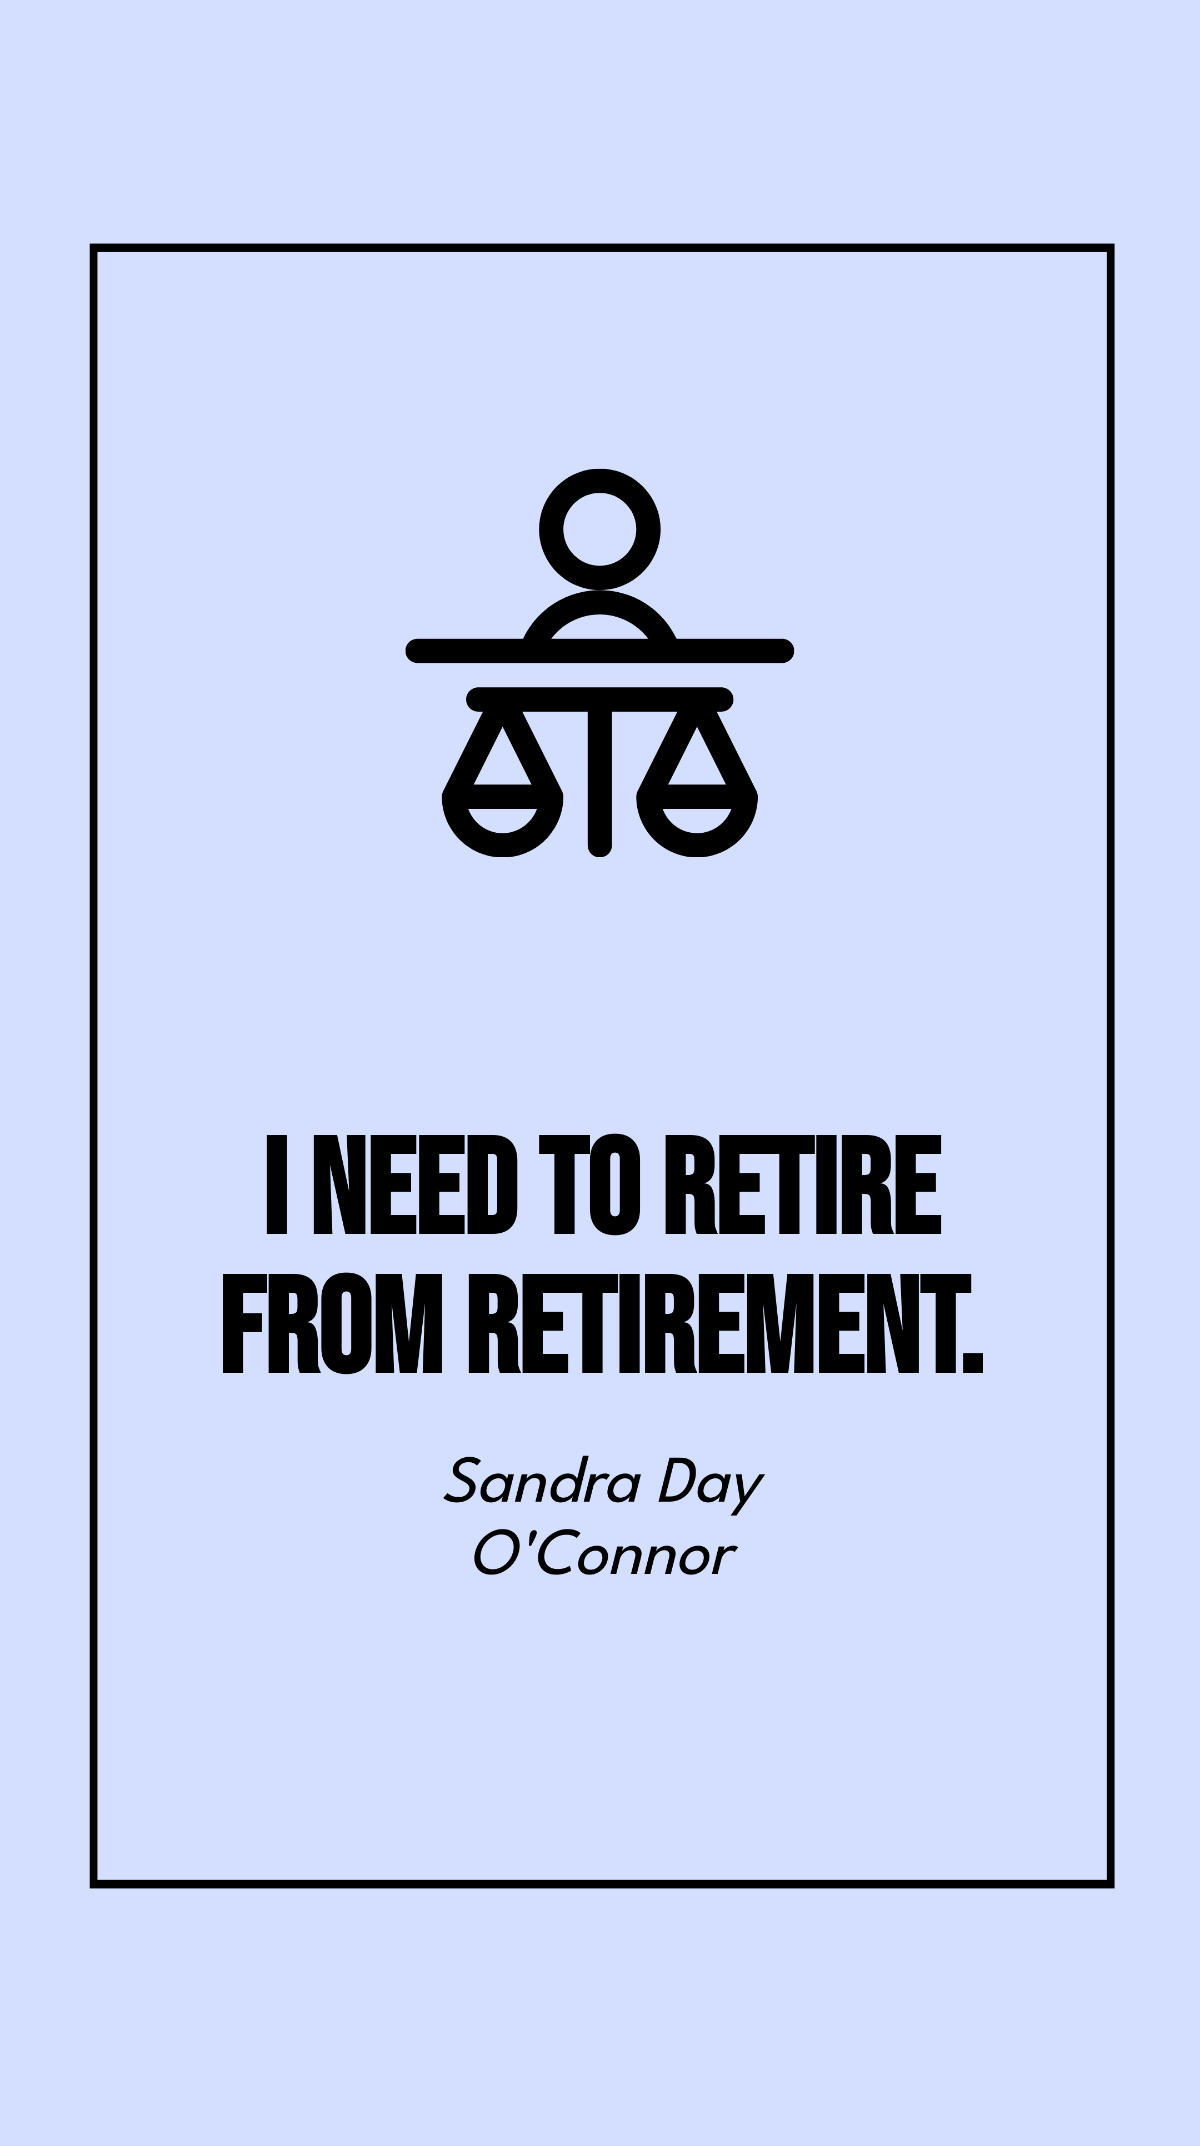 Free Sandra Day O'Connor - I need to retire from retirement. Template